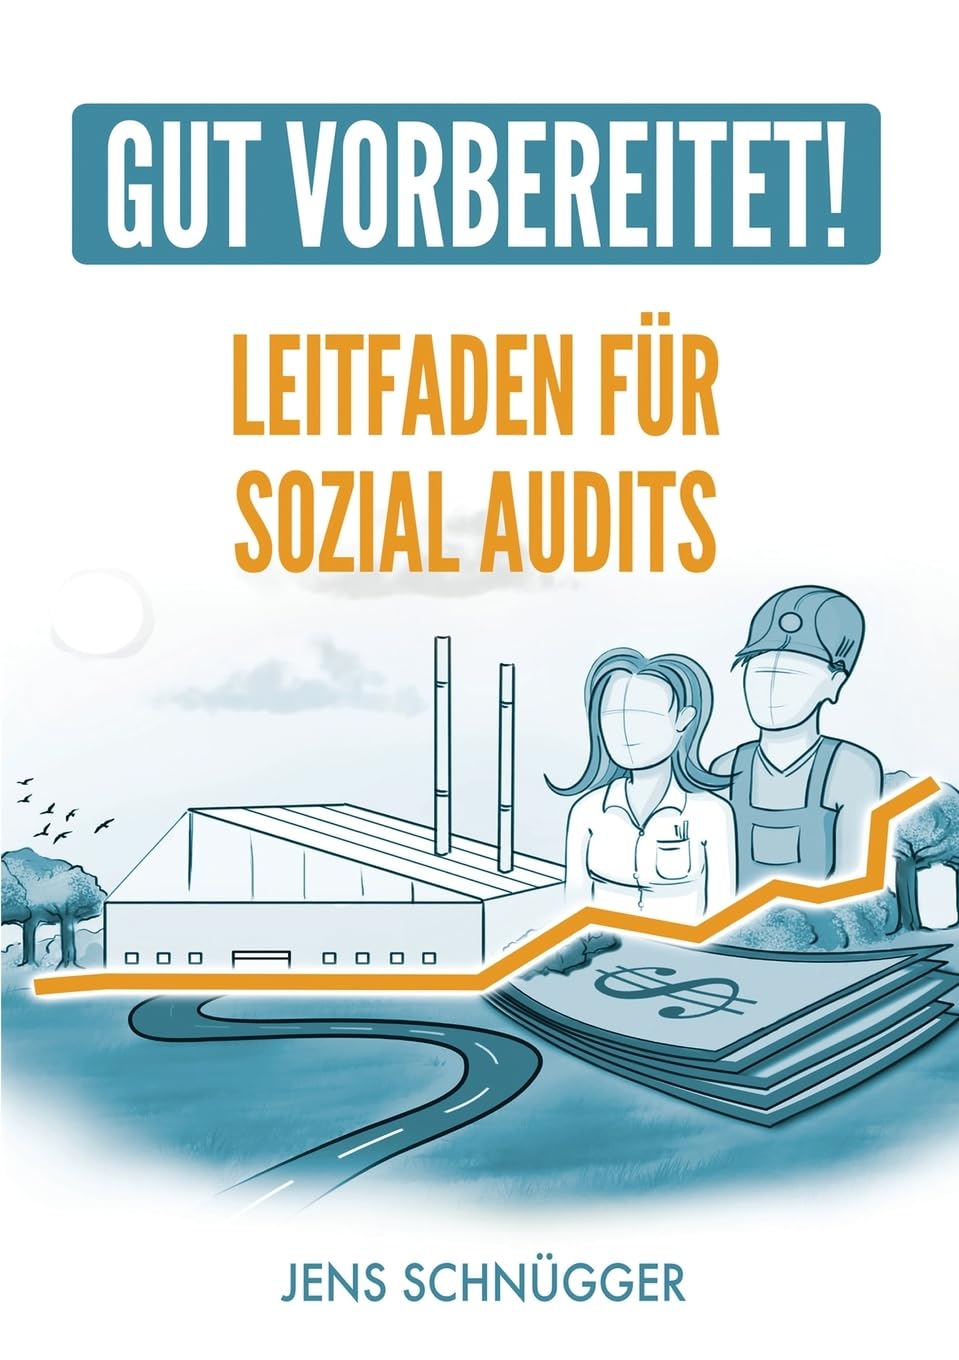 Unveiling the Ultimate Guide to Social Audits: "Be Prepared!" by Jens Schnuegger